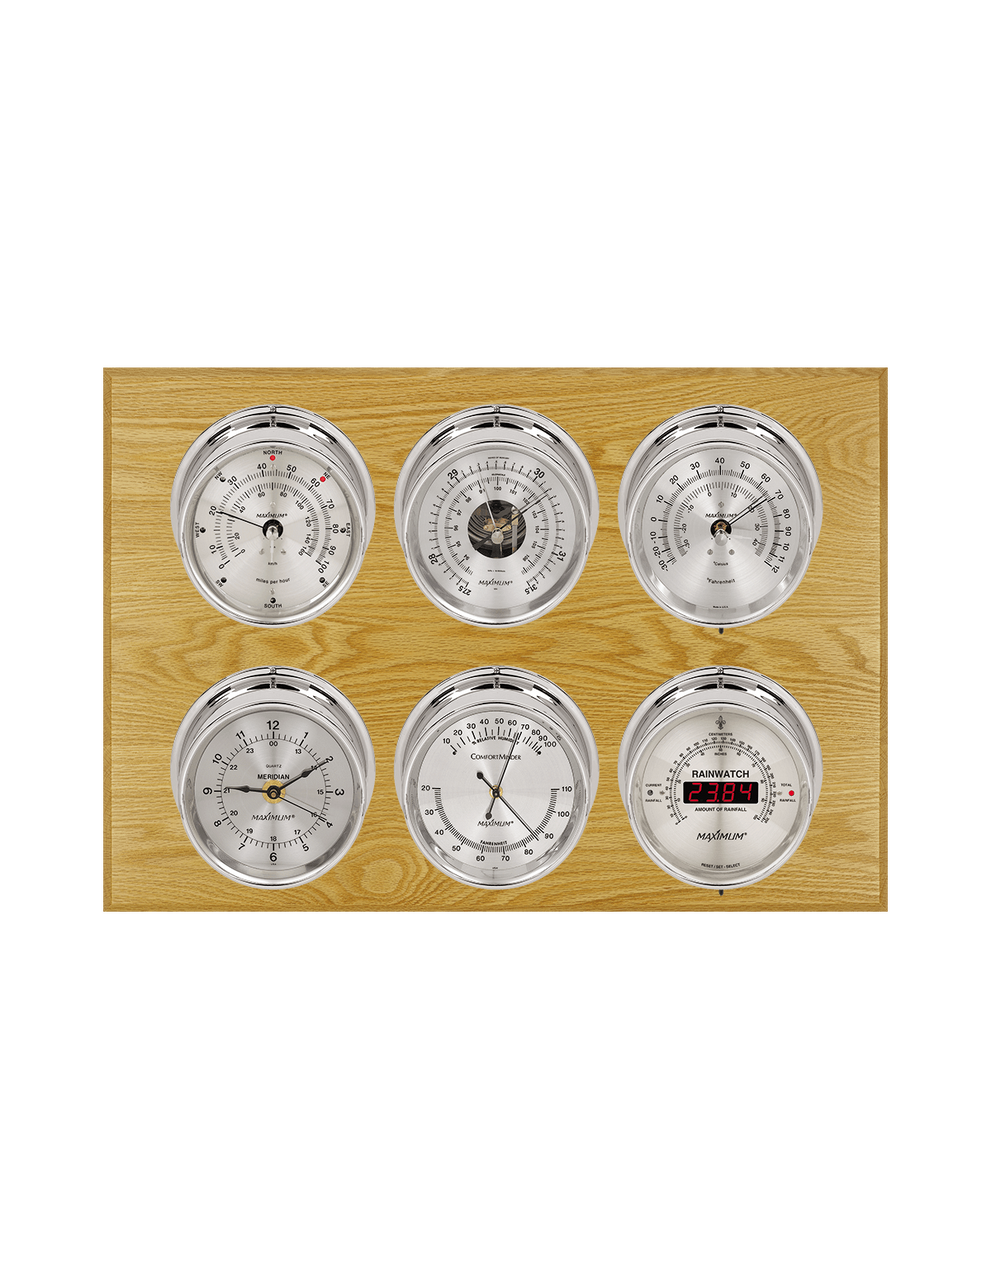 Weathermaster Wind, Thermometer, Barometer, Humidity, Rainfall, and Time Weather Station - 6 Instruments - Polished Chrome Cases - Oak - Silver Face -  Reads 0-100 mph